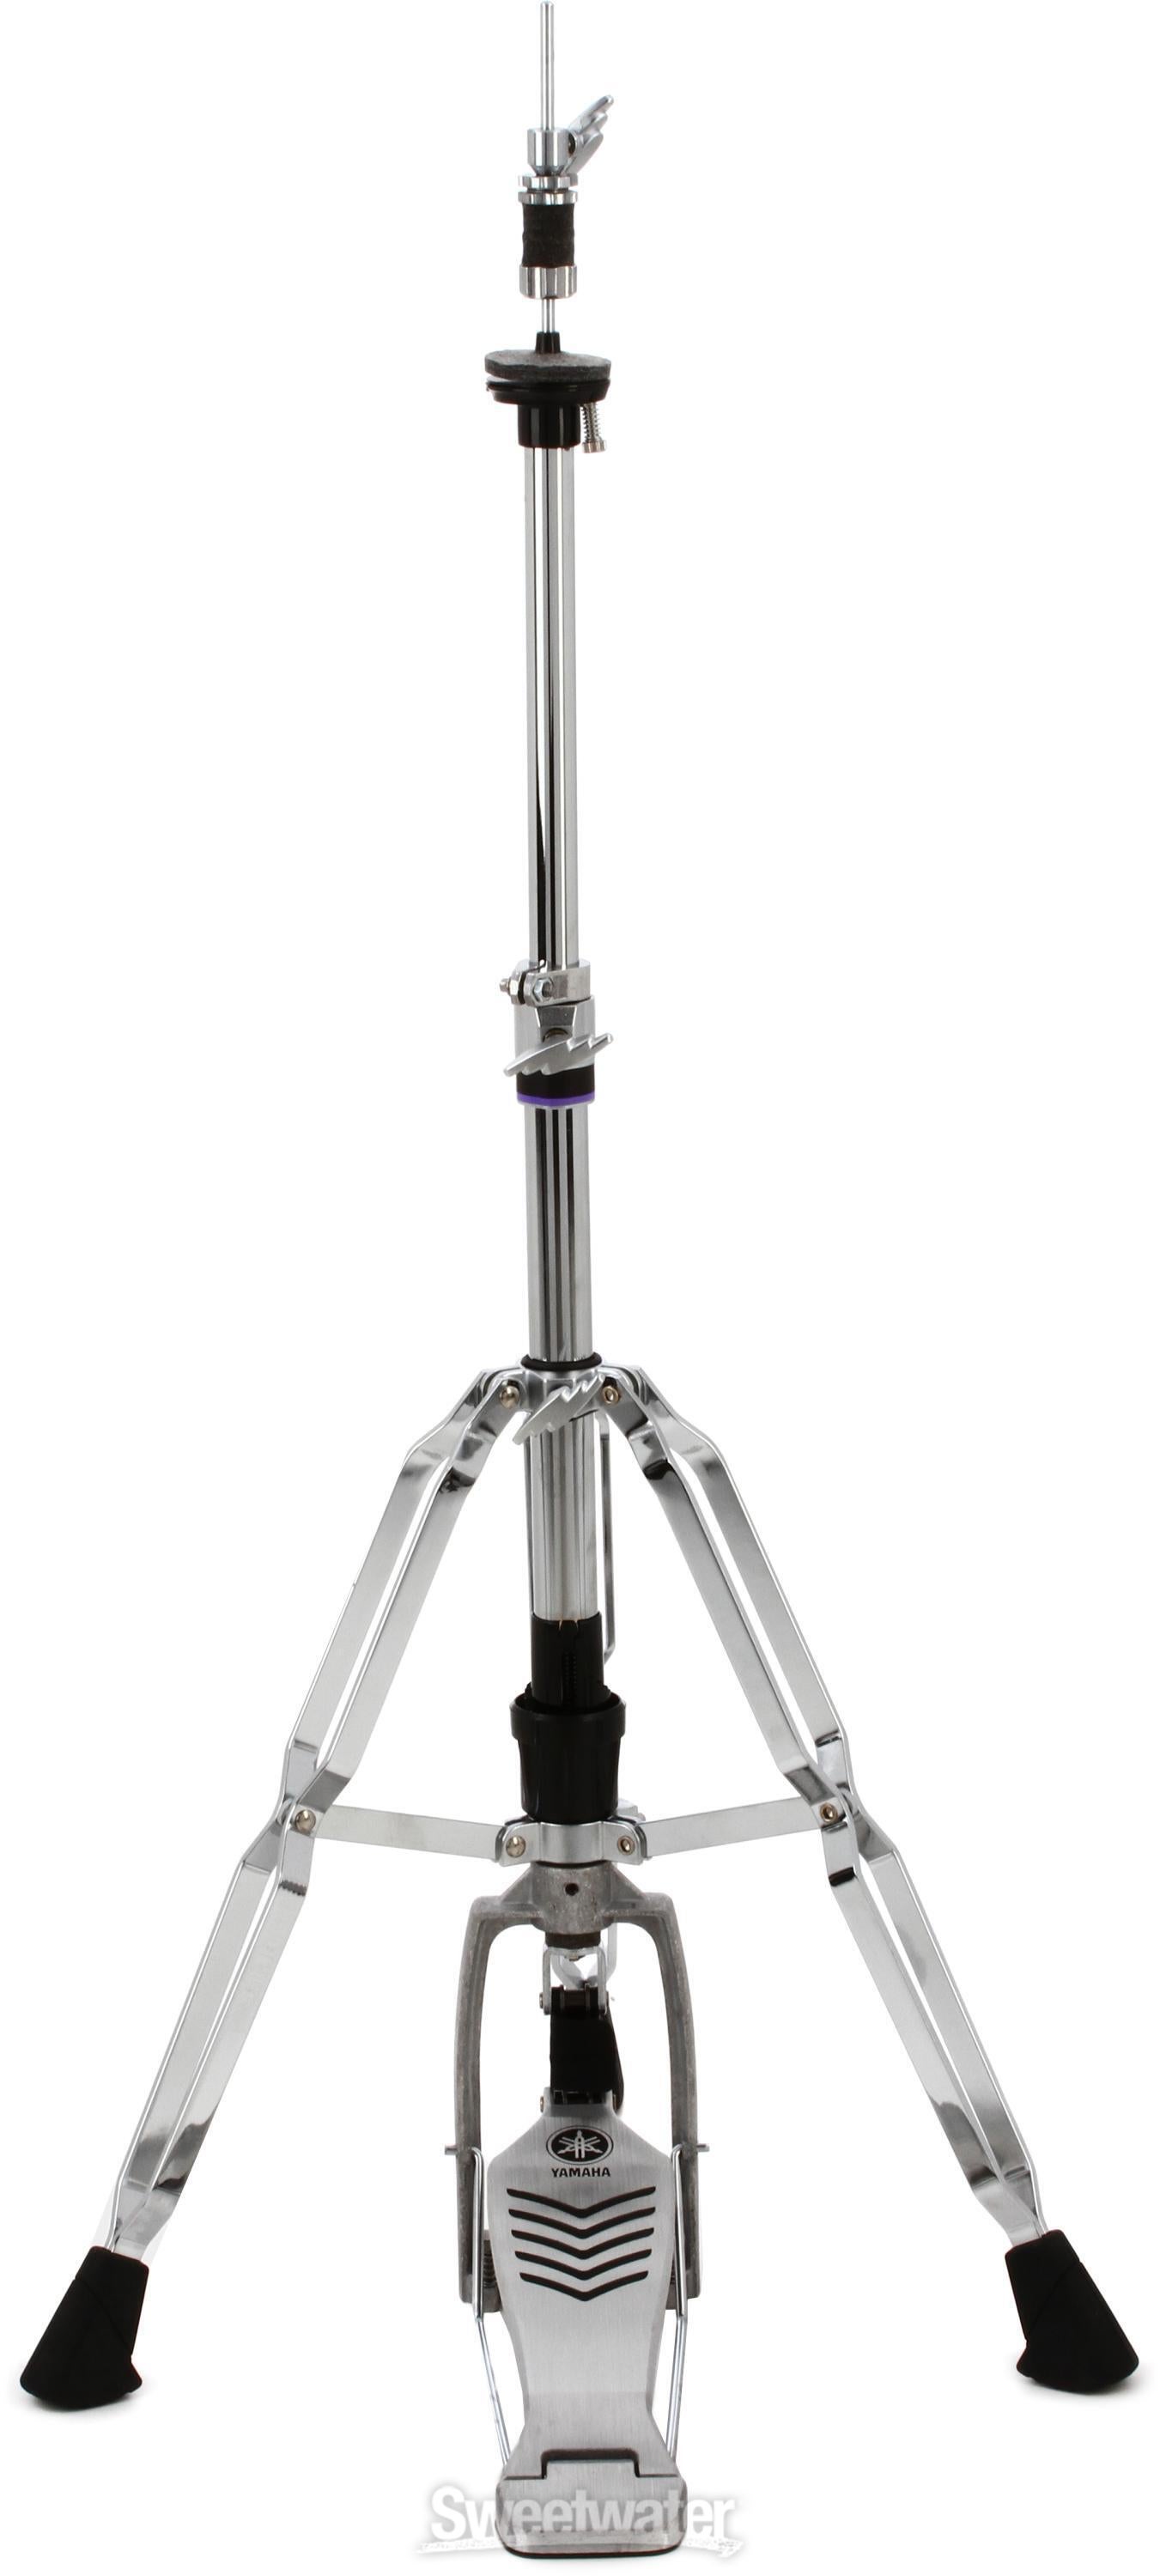 Yamaha HS-850 Double Braced Hi-hat Stand - 3-leg | Sweetwater